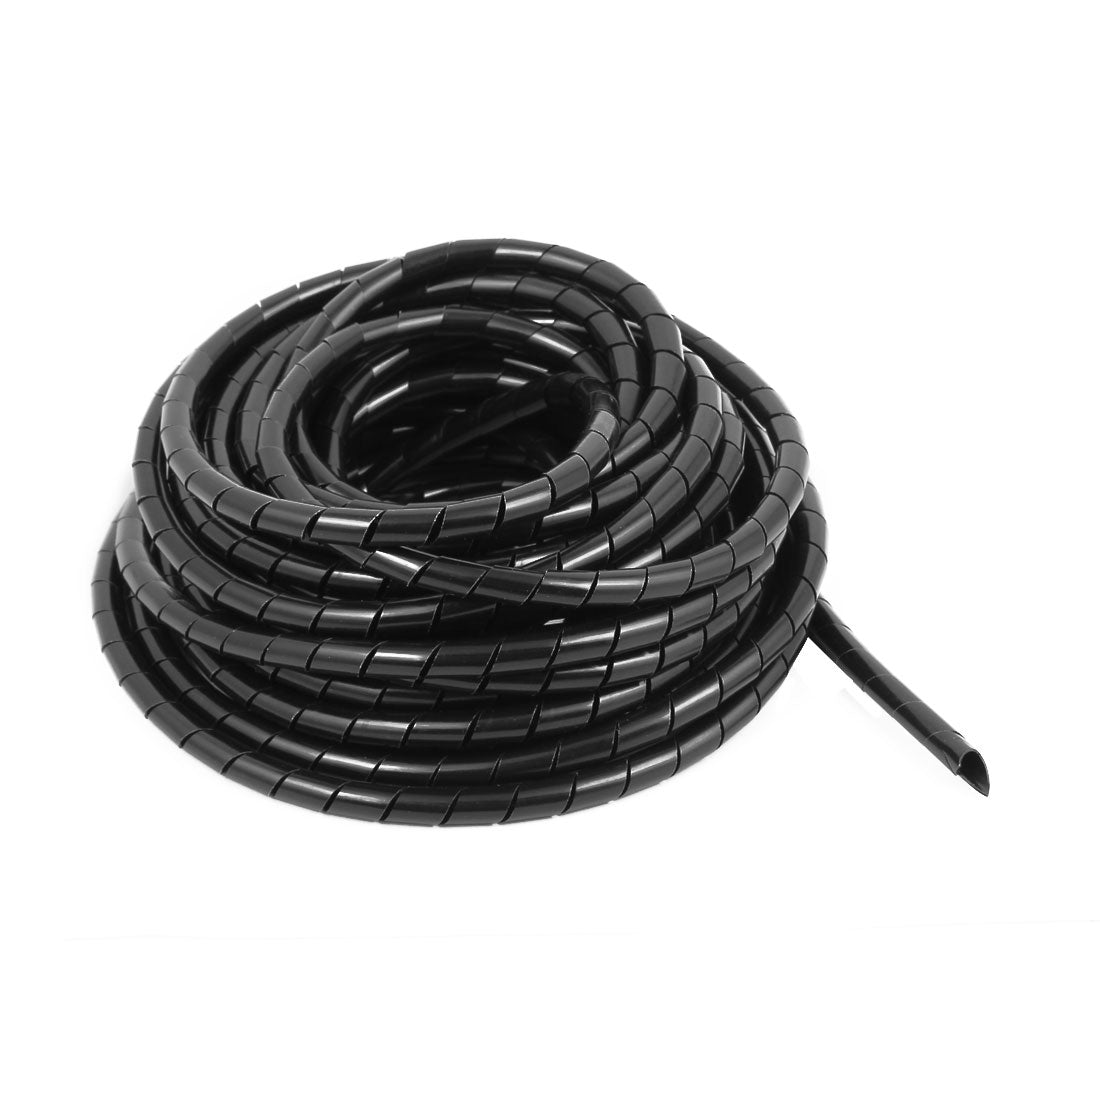 uxcell Uxcell 8mm Dia 10.5M Length Cable Wire Tidy Wrap Spiral Wrapping Band Organizer Black